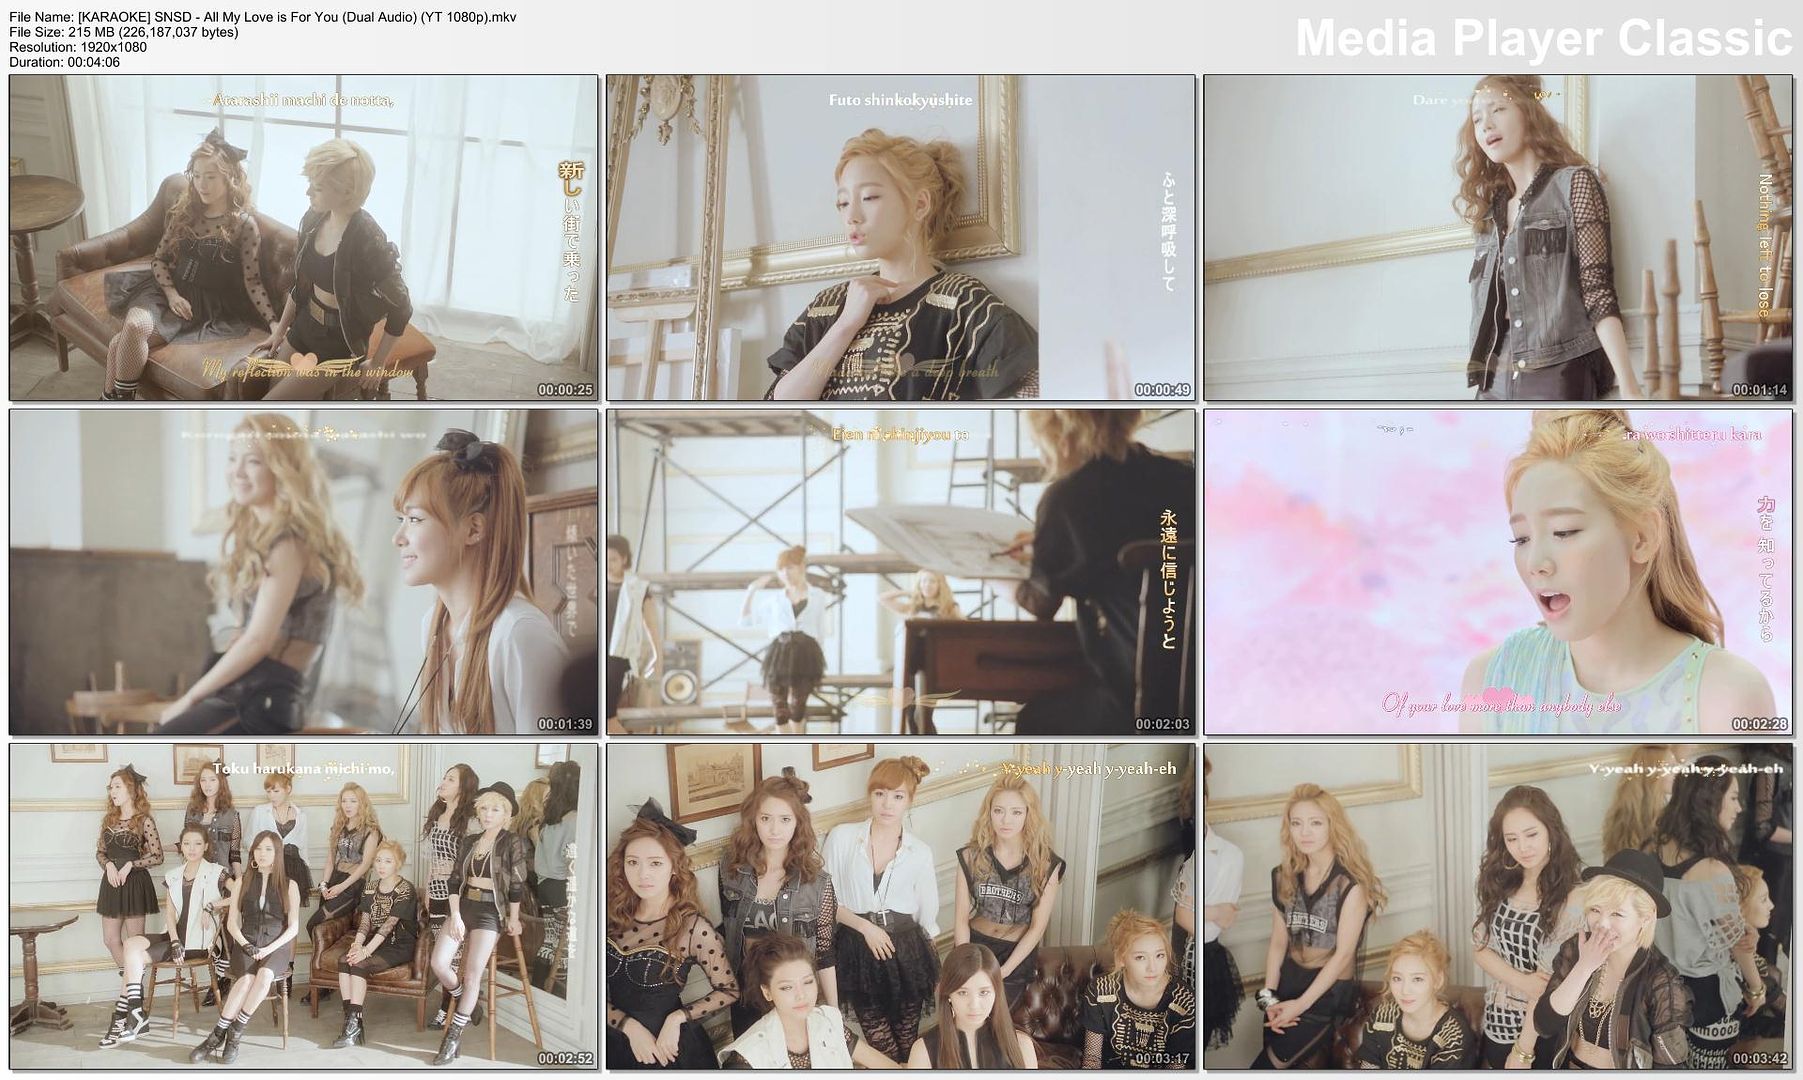 [karaoke] Girls’ Generation Snsd All My Love Is For You Dual Audio Youtube Hd 1080p